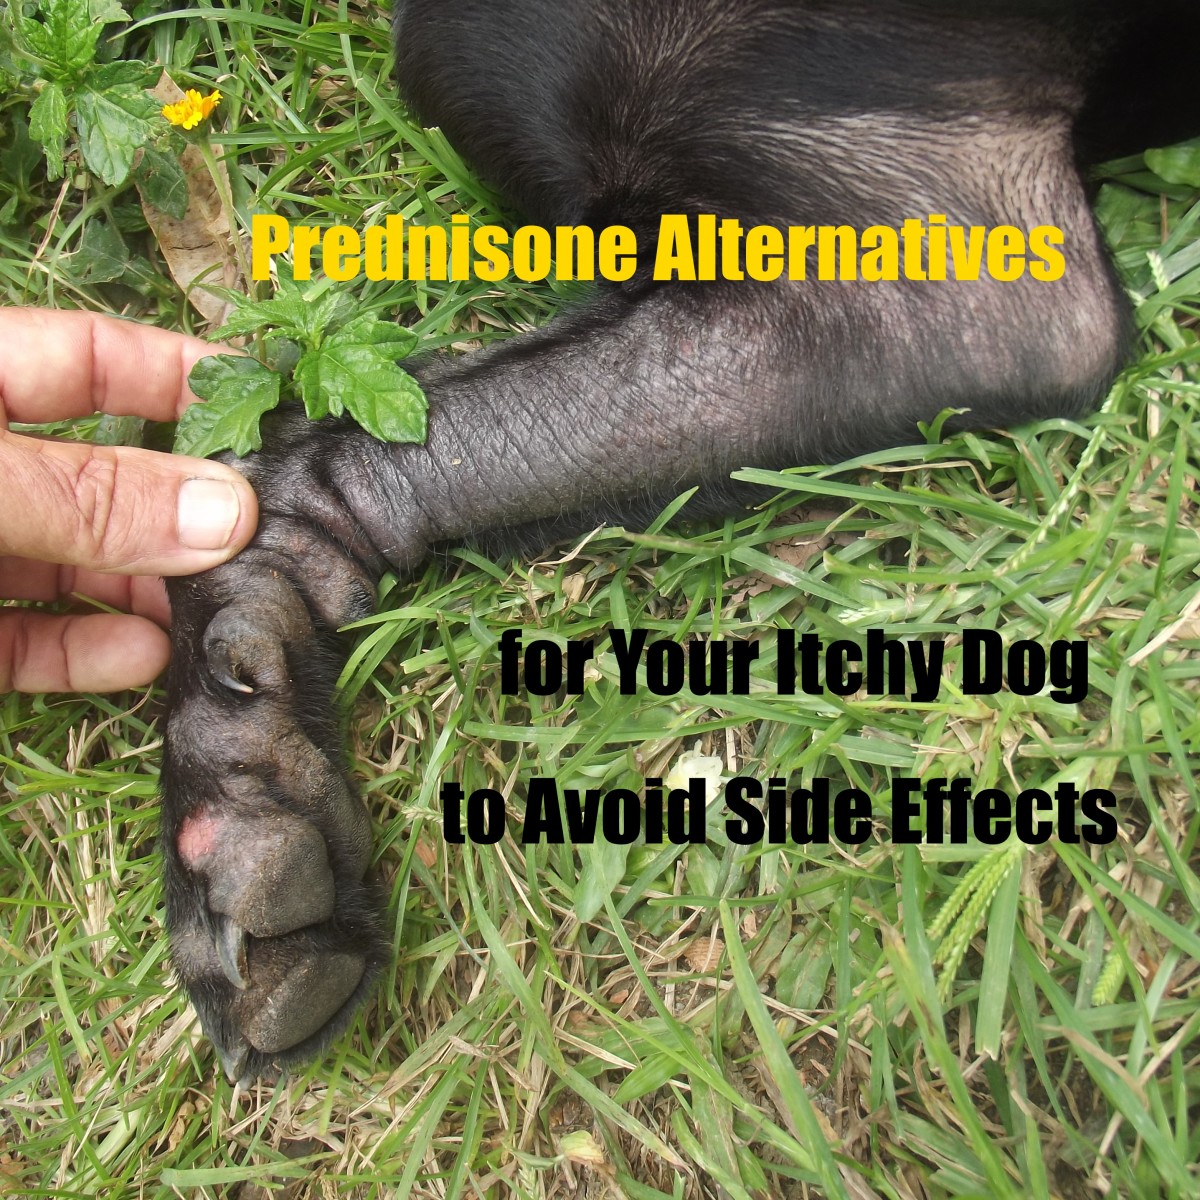 Prednisone Alternatives so That Your Itchy Dog Can Avoid the Serious Side Effects